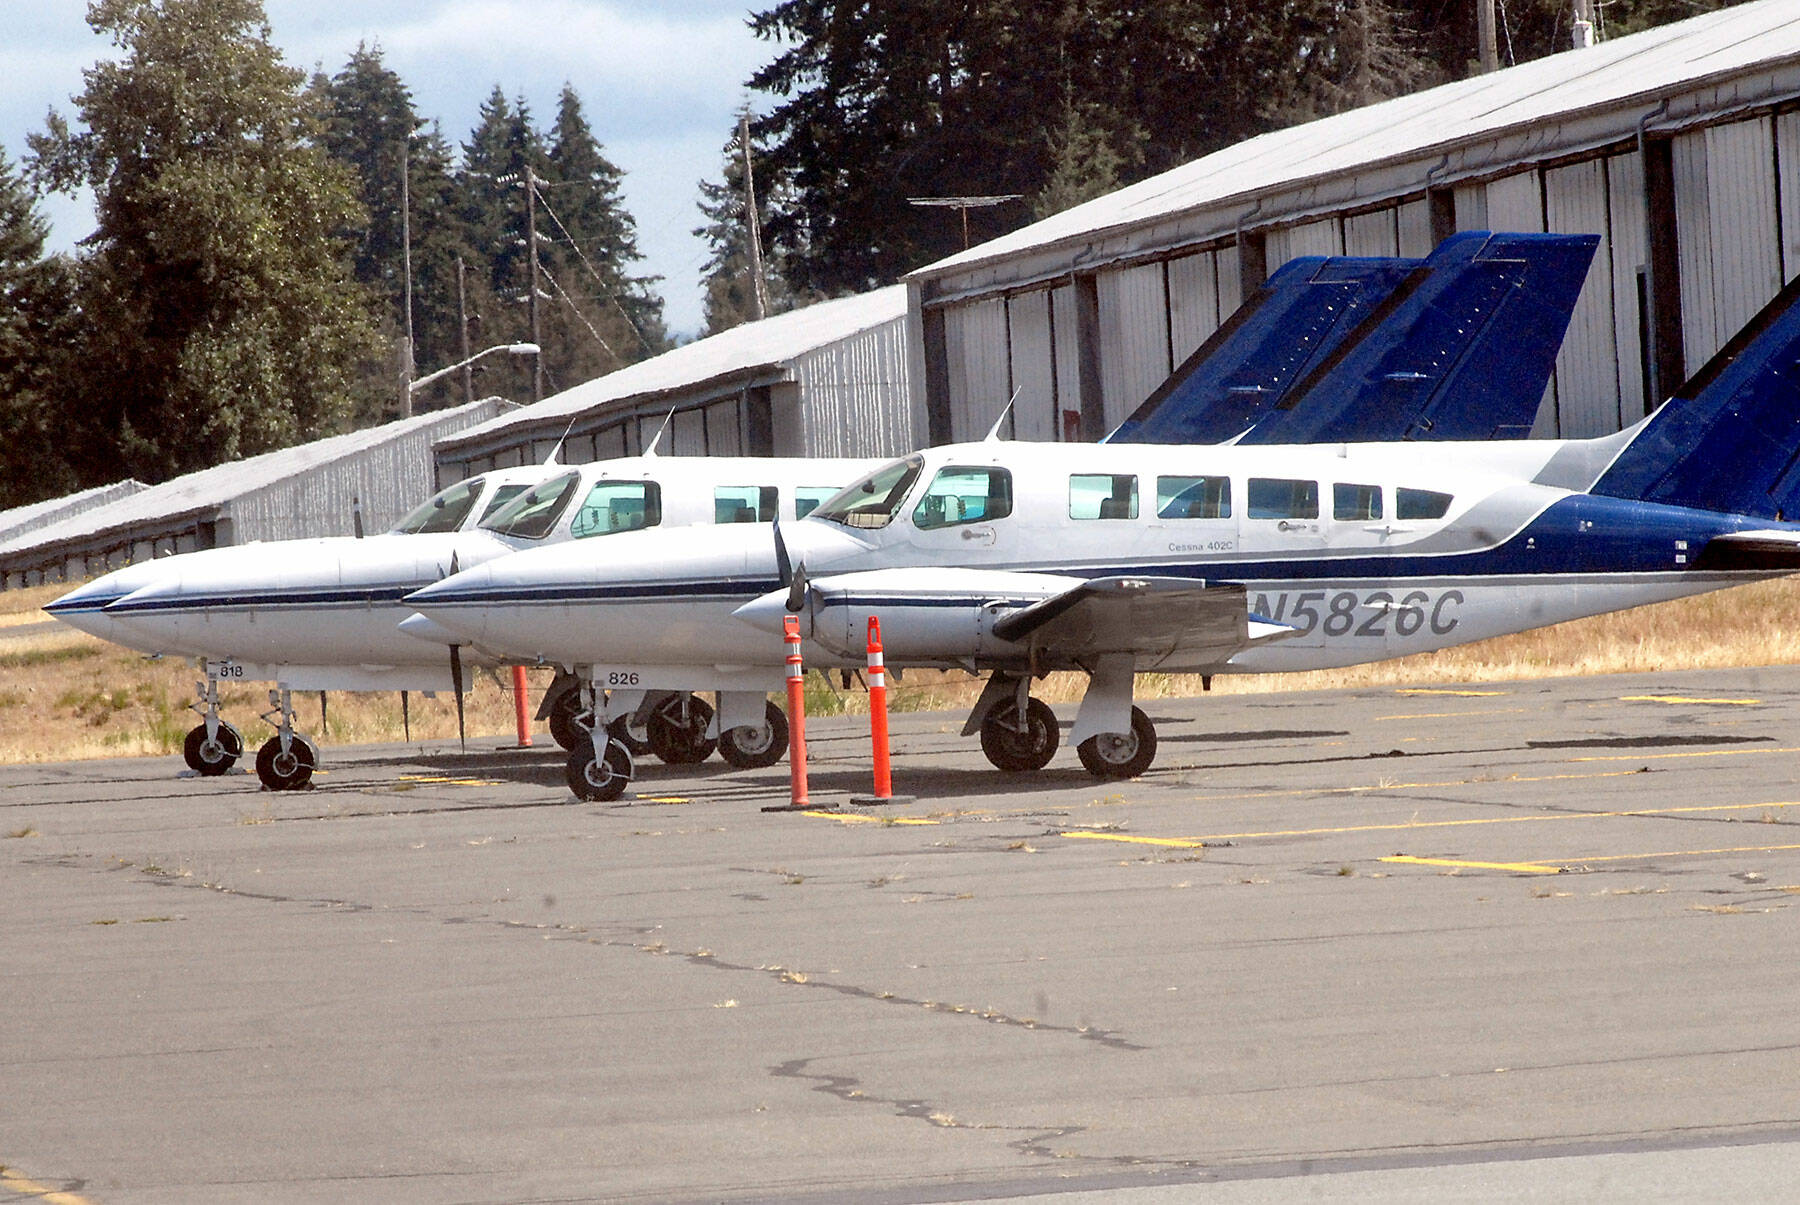 Three Dash Air Shuttle Cessna 403C aircraft sit parked at William R. Fairchild International Airport in August 2021 as they await entering into scheduled service between Port Angeles and SeaTac Airport. (Keith Thorpe/Peninsula Daily News)